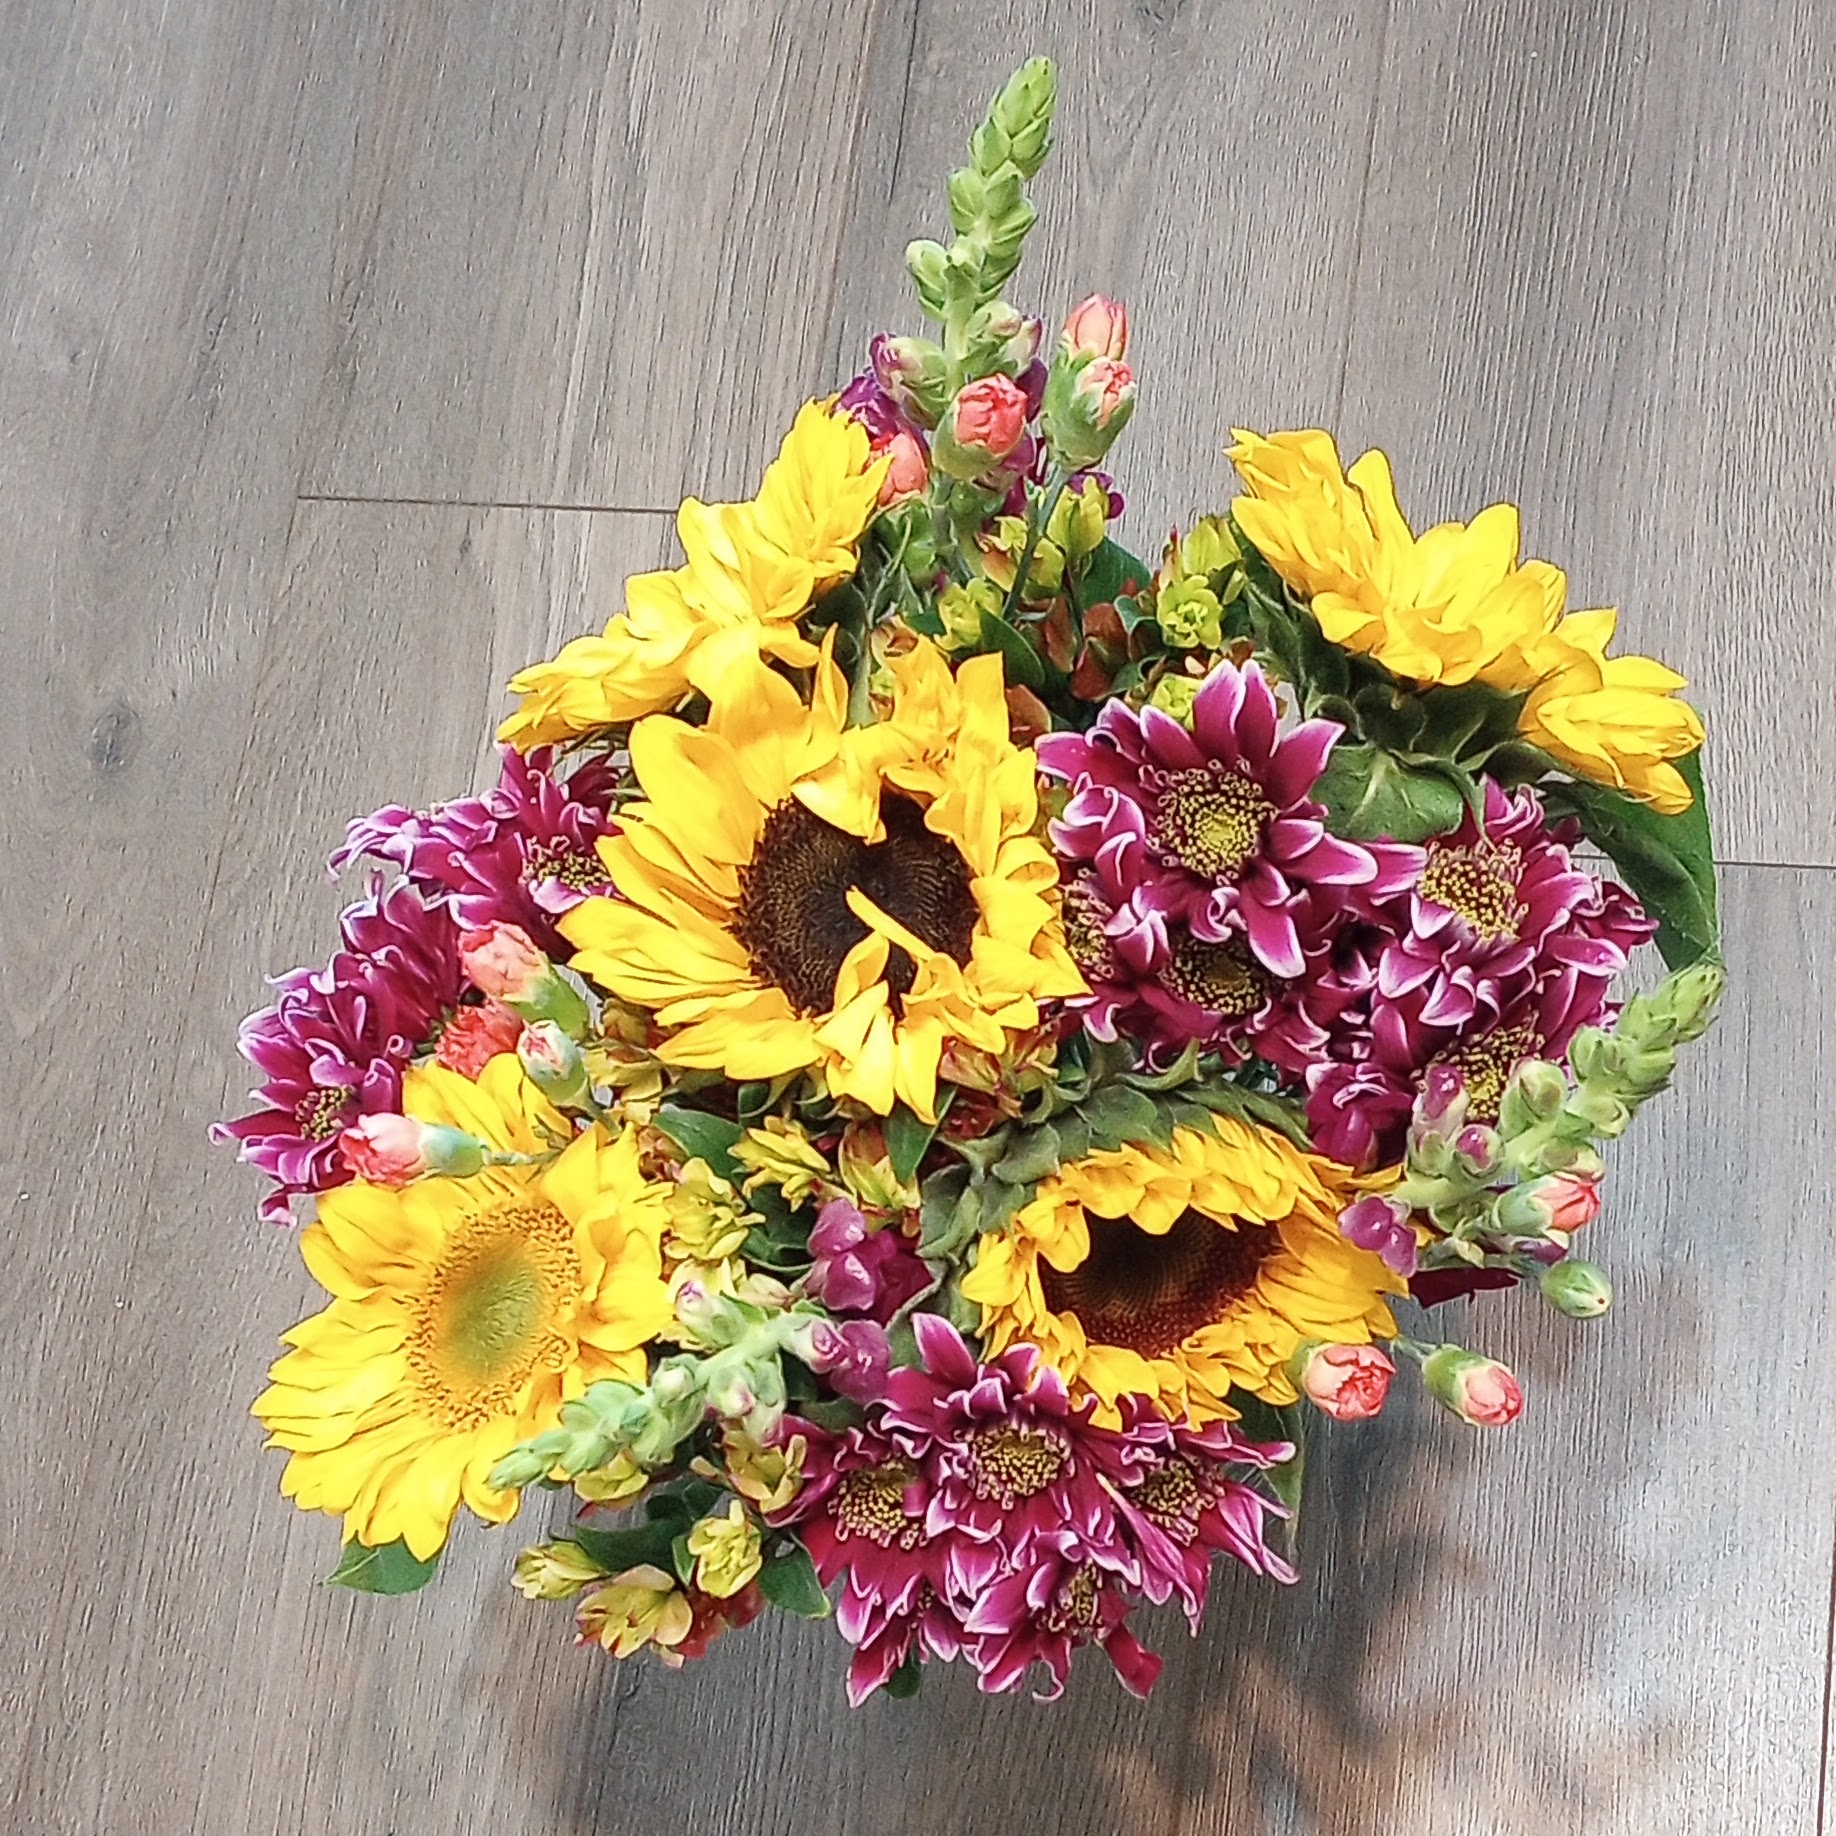 autumn harvest bouquet picture with sunflowers